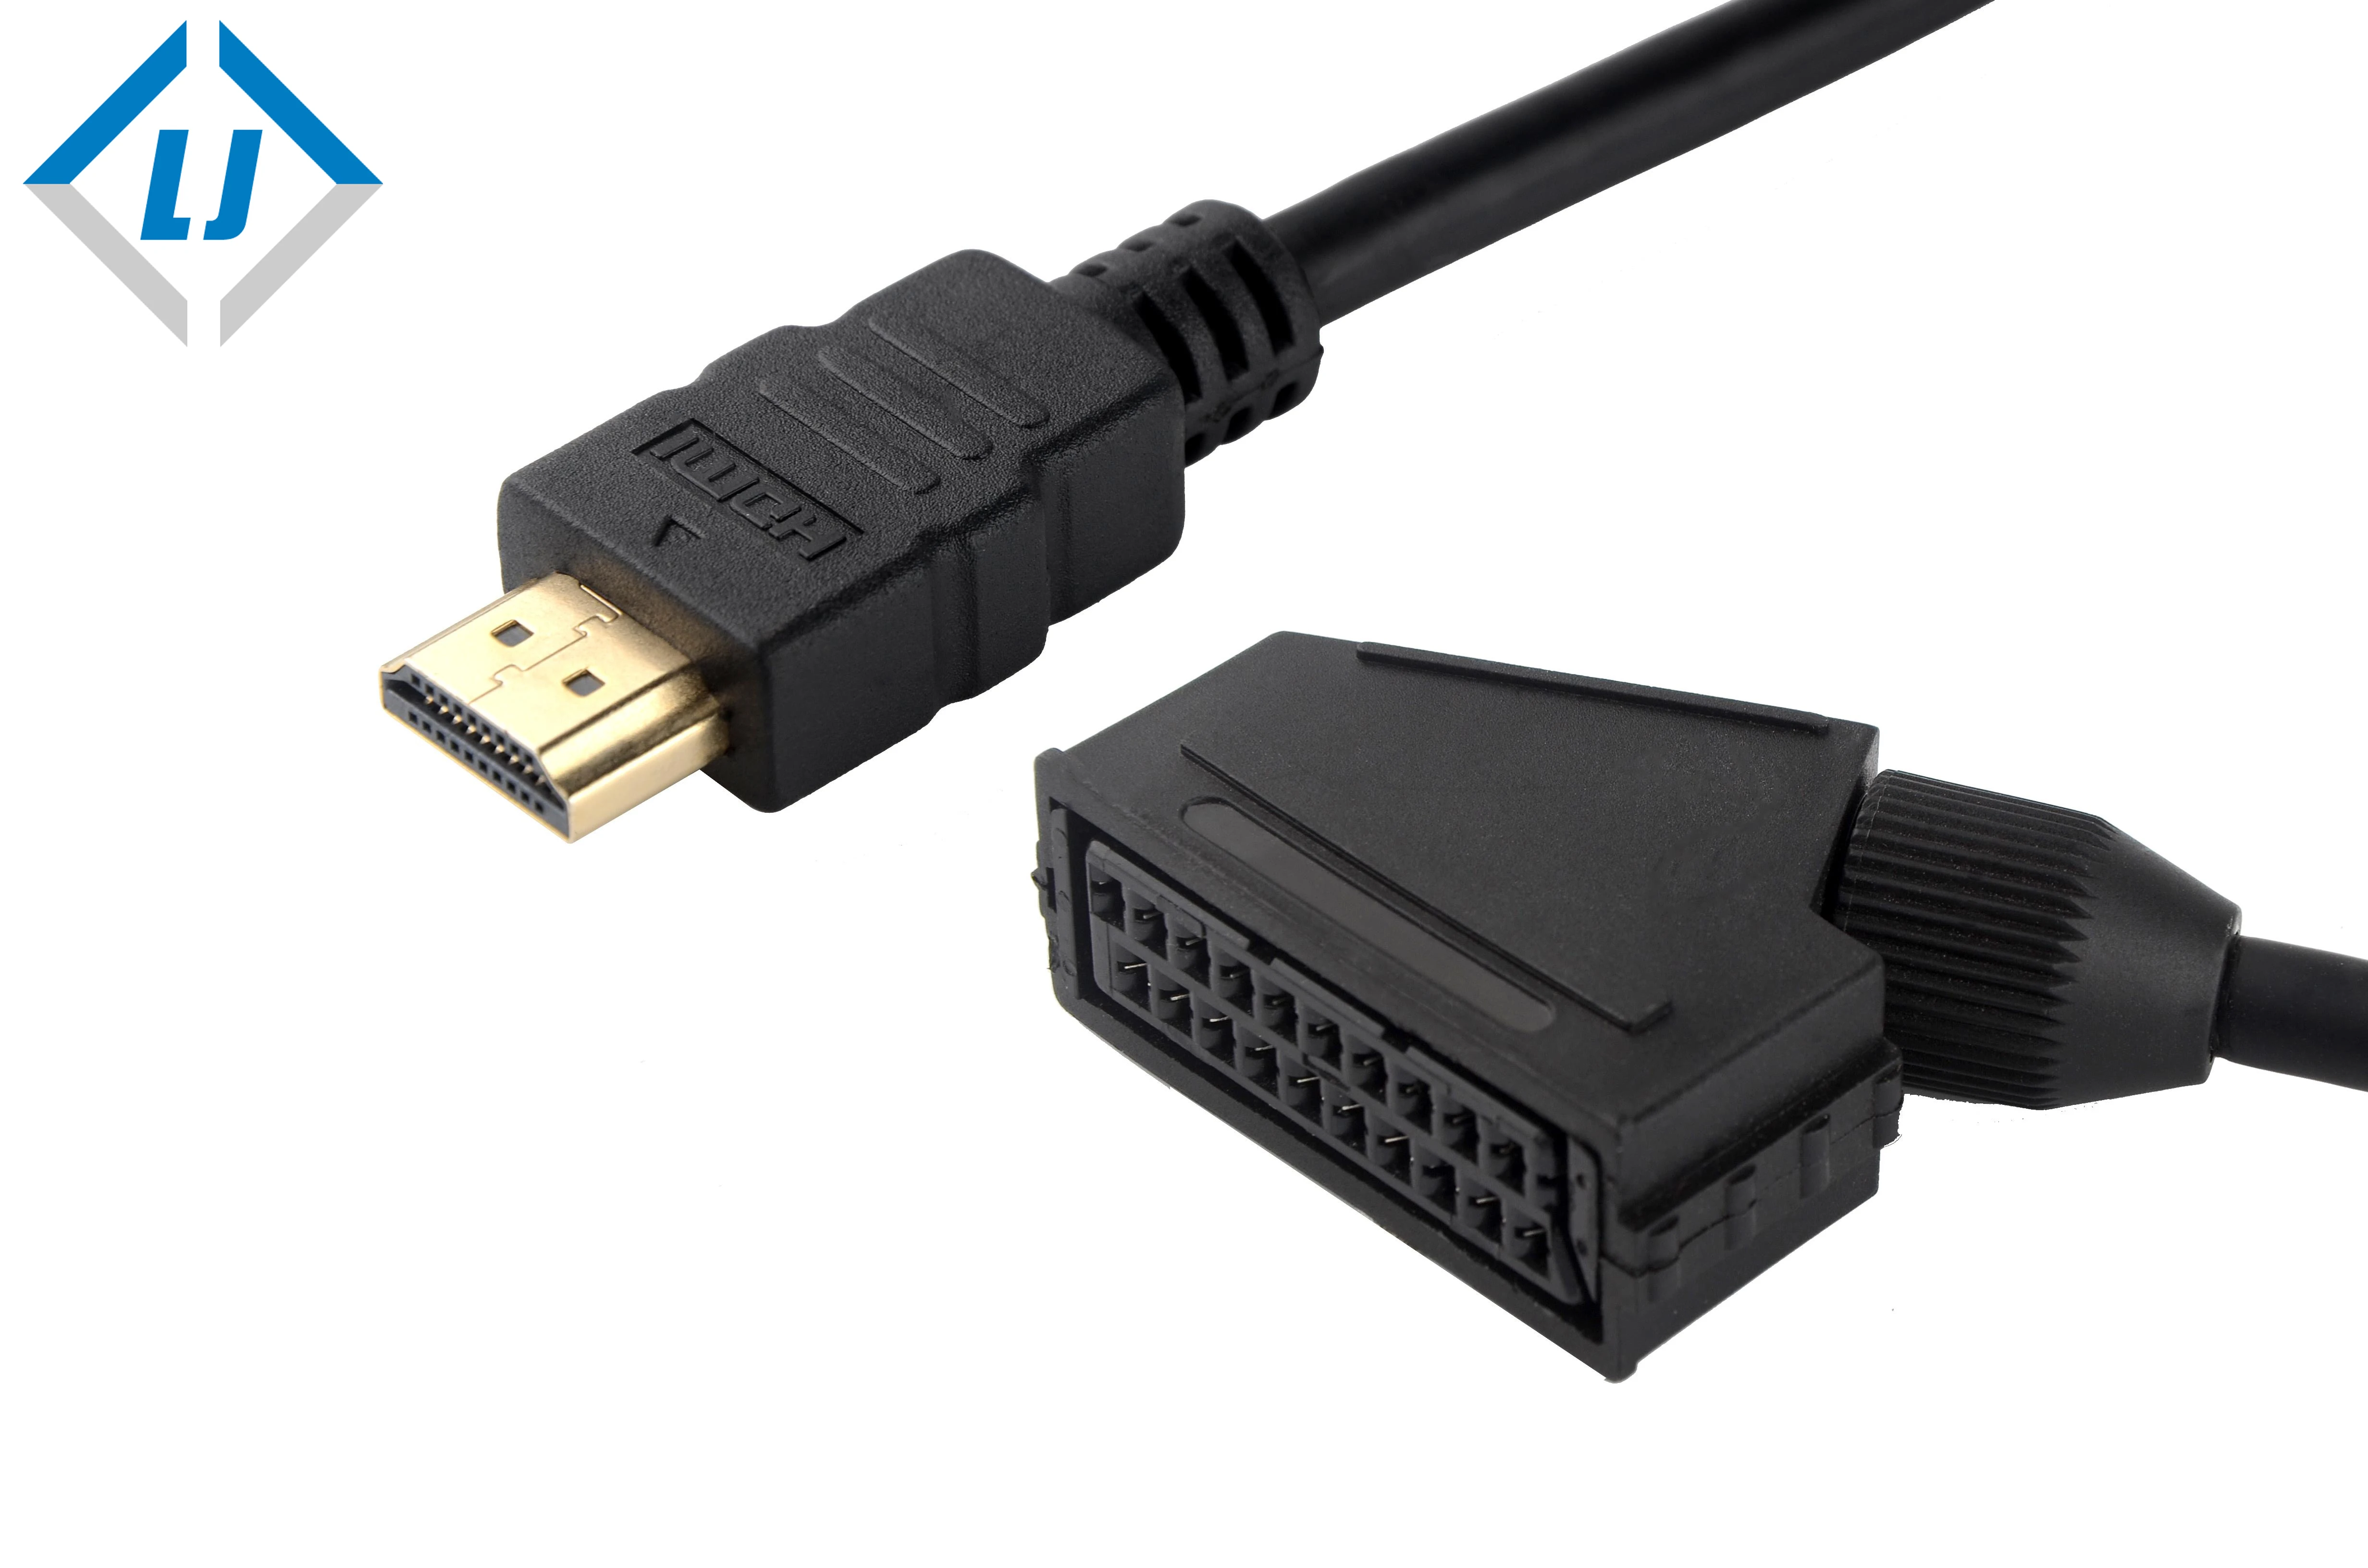 Wholesale LJ Hot sales HDMI to scart cable male to female support Cable for DVD TV From m.alibaba.com